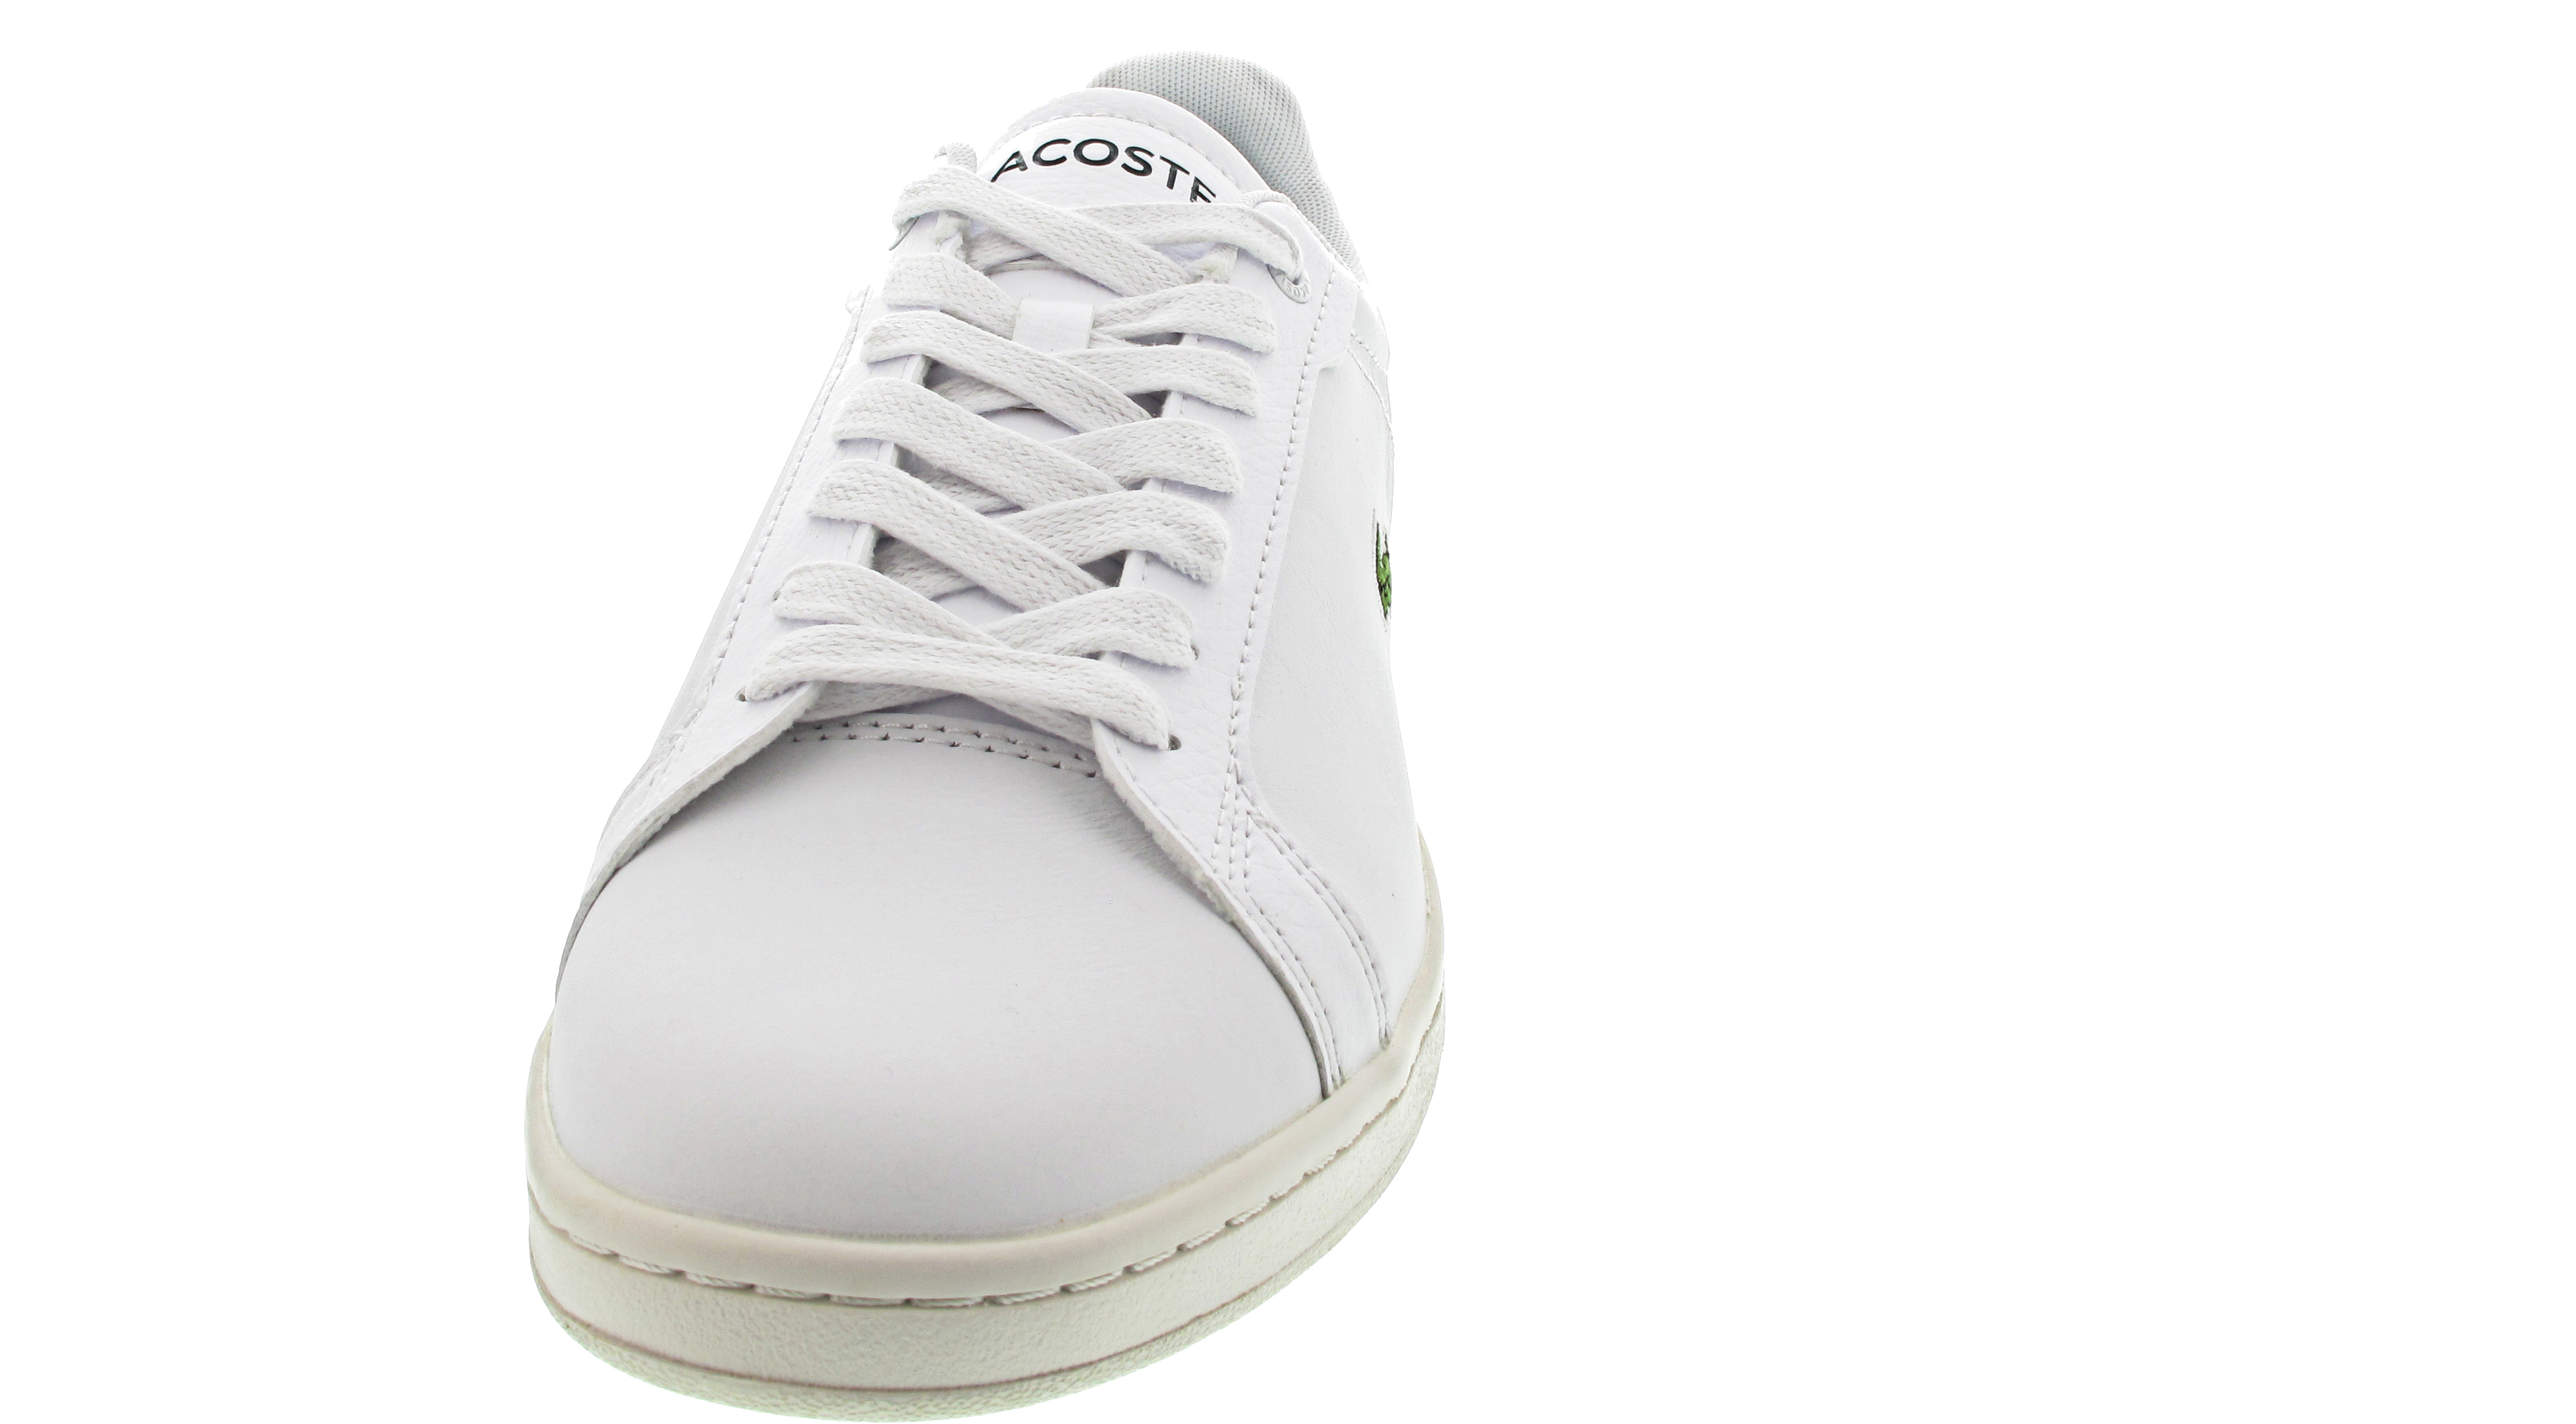 Lacoste Carnaby Pro Leather Premi